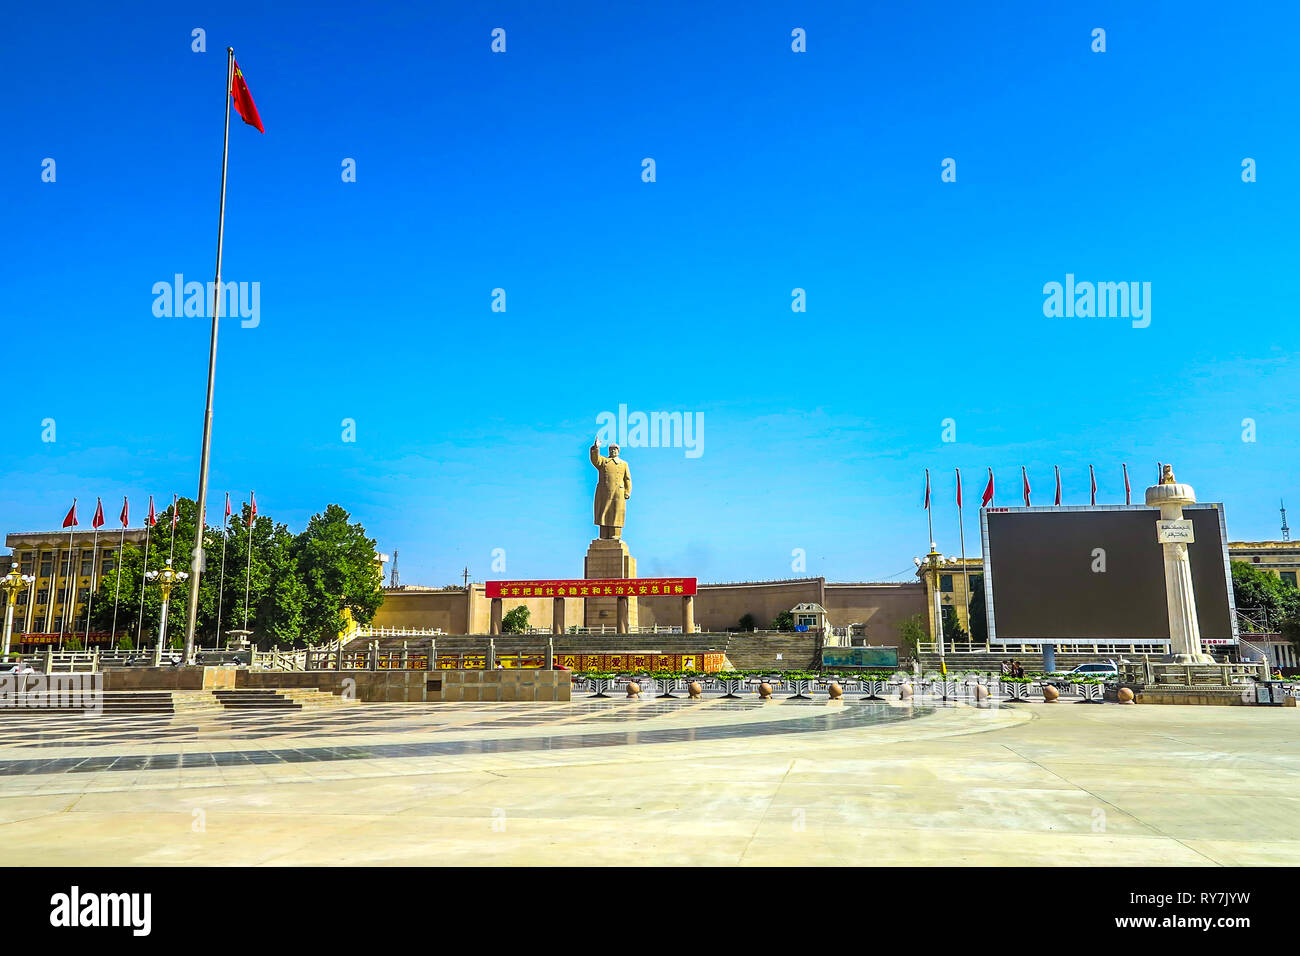 Kashgar People's Park Square Mao Zedong Statue with Chinese Waving Flag Stock Photo